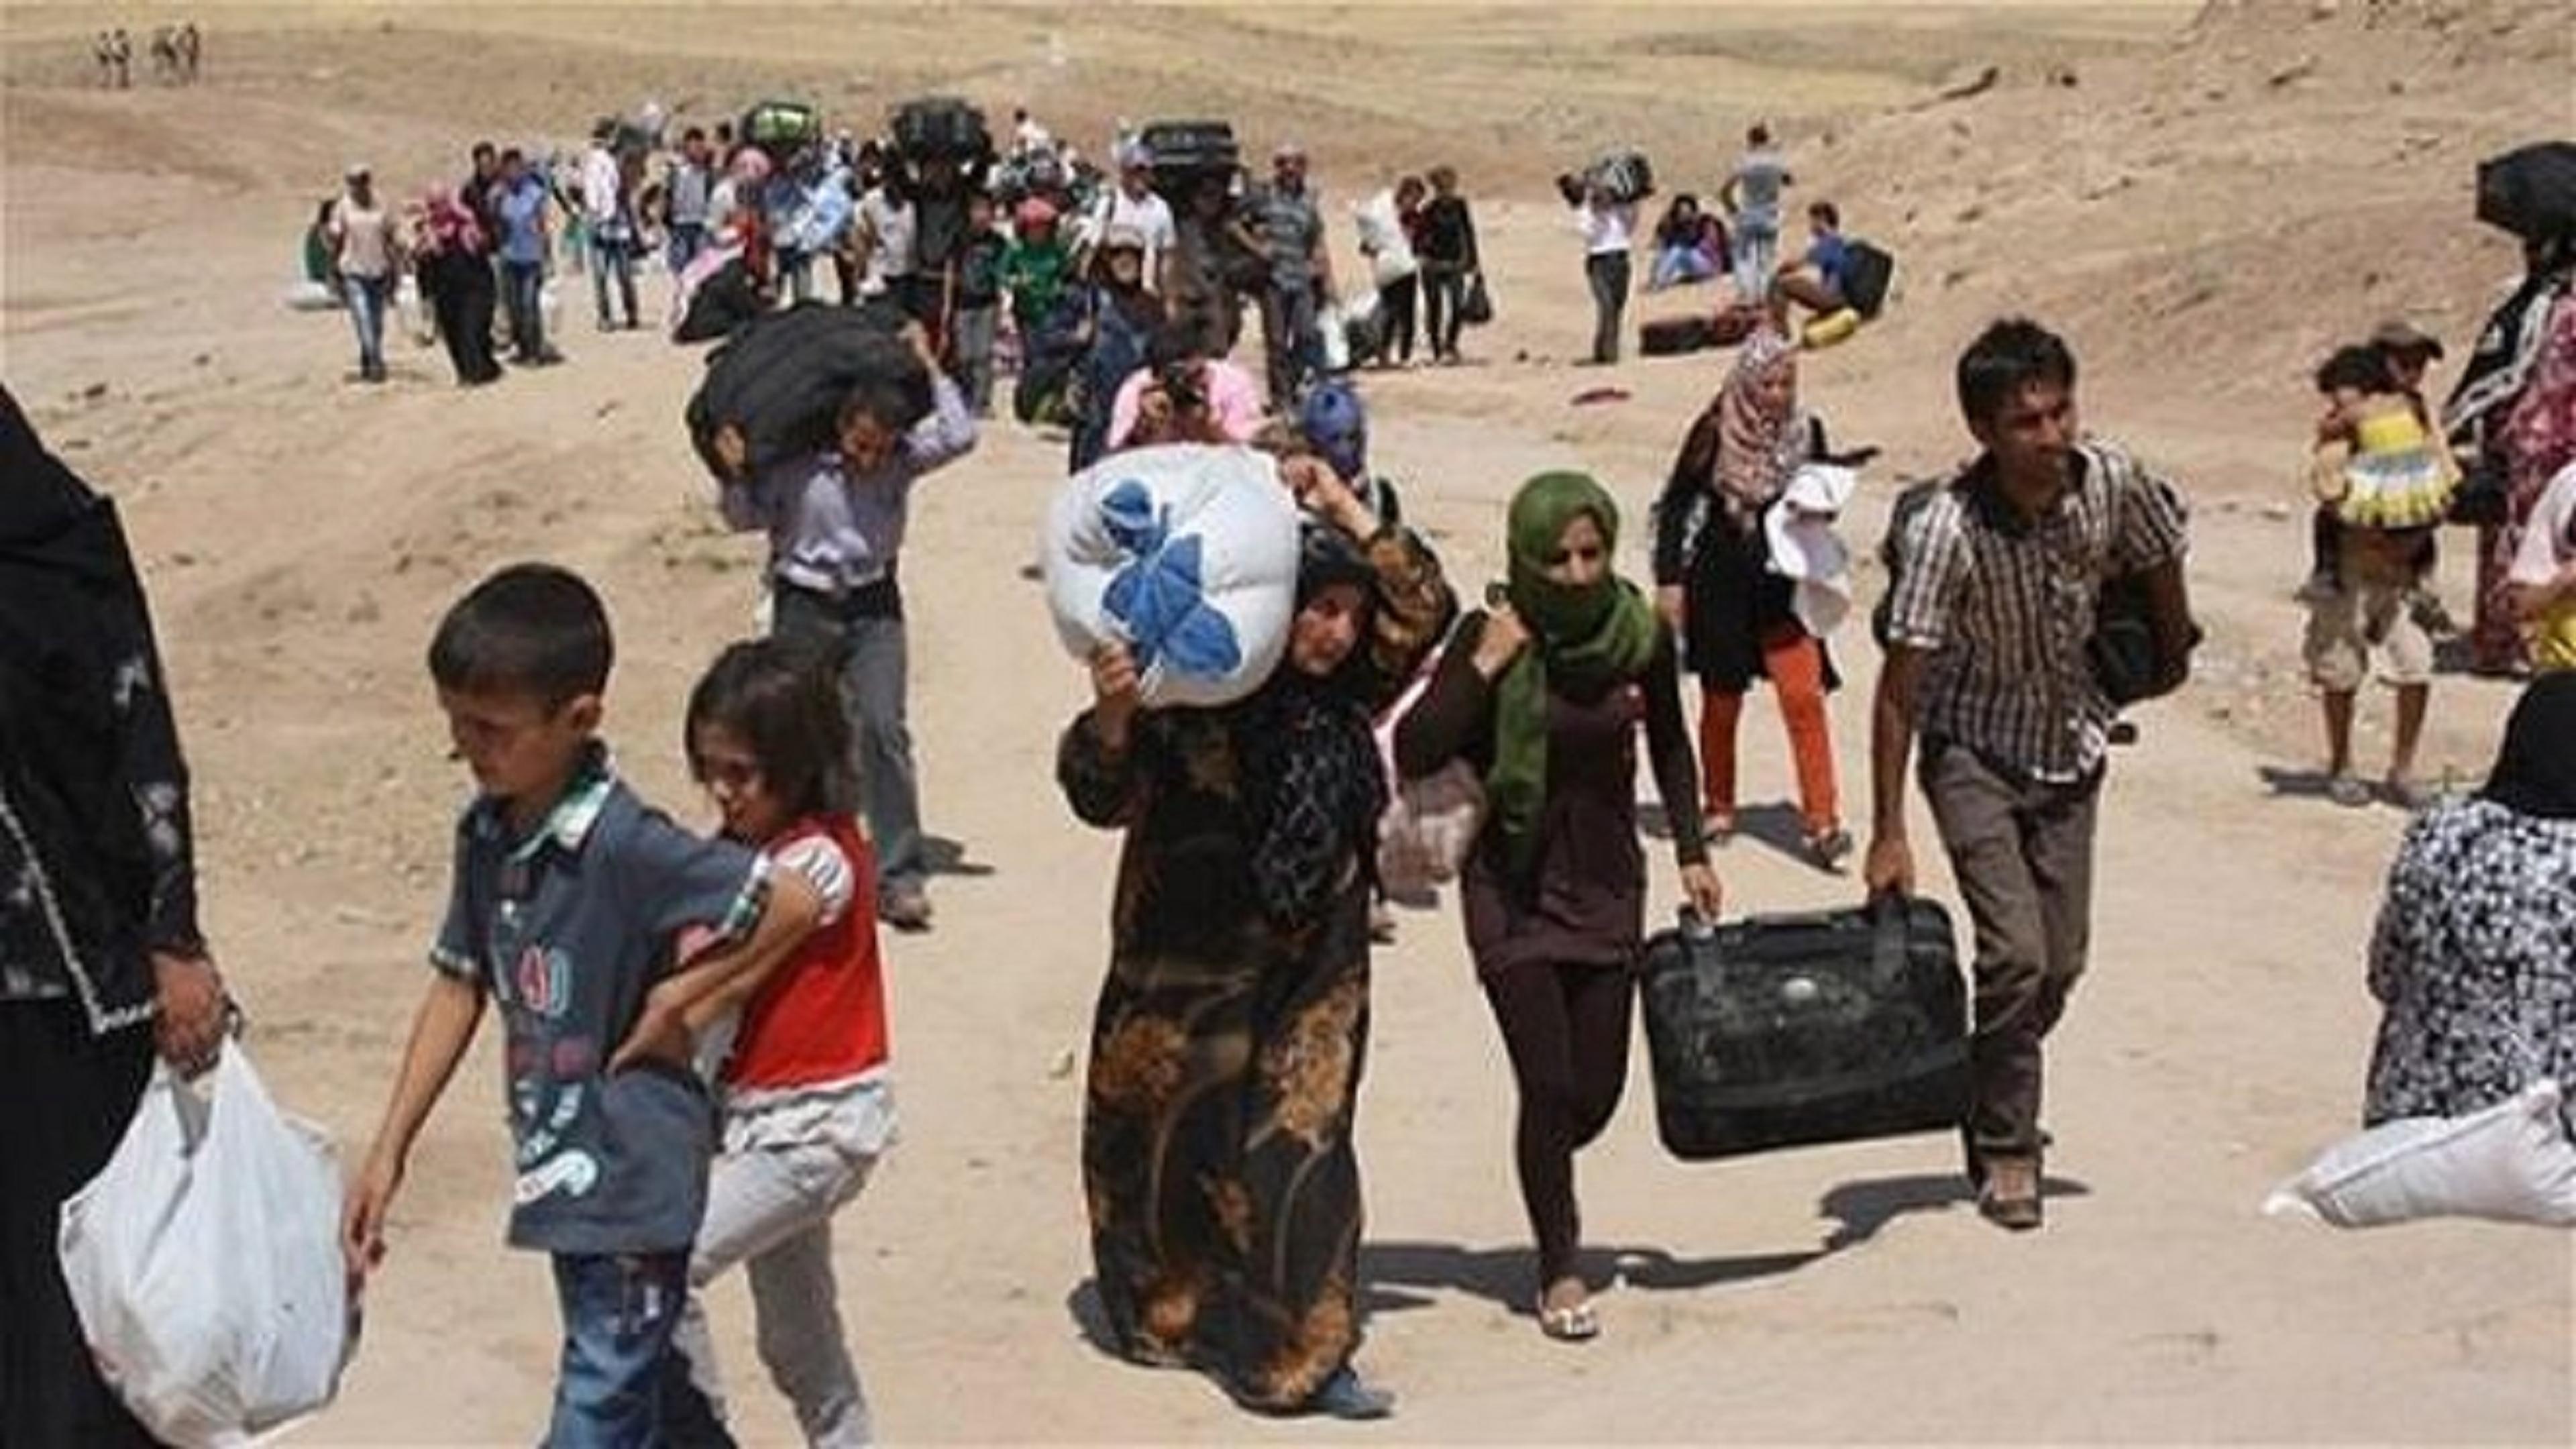 Fear of regime and displacement towards eastern Euphrates